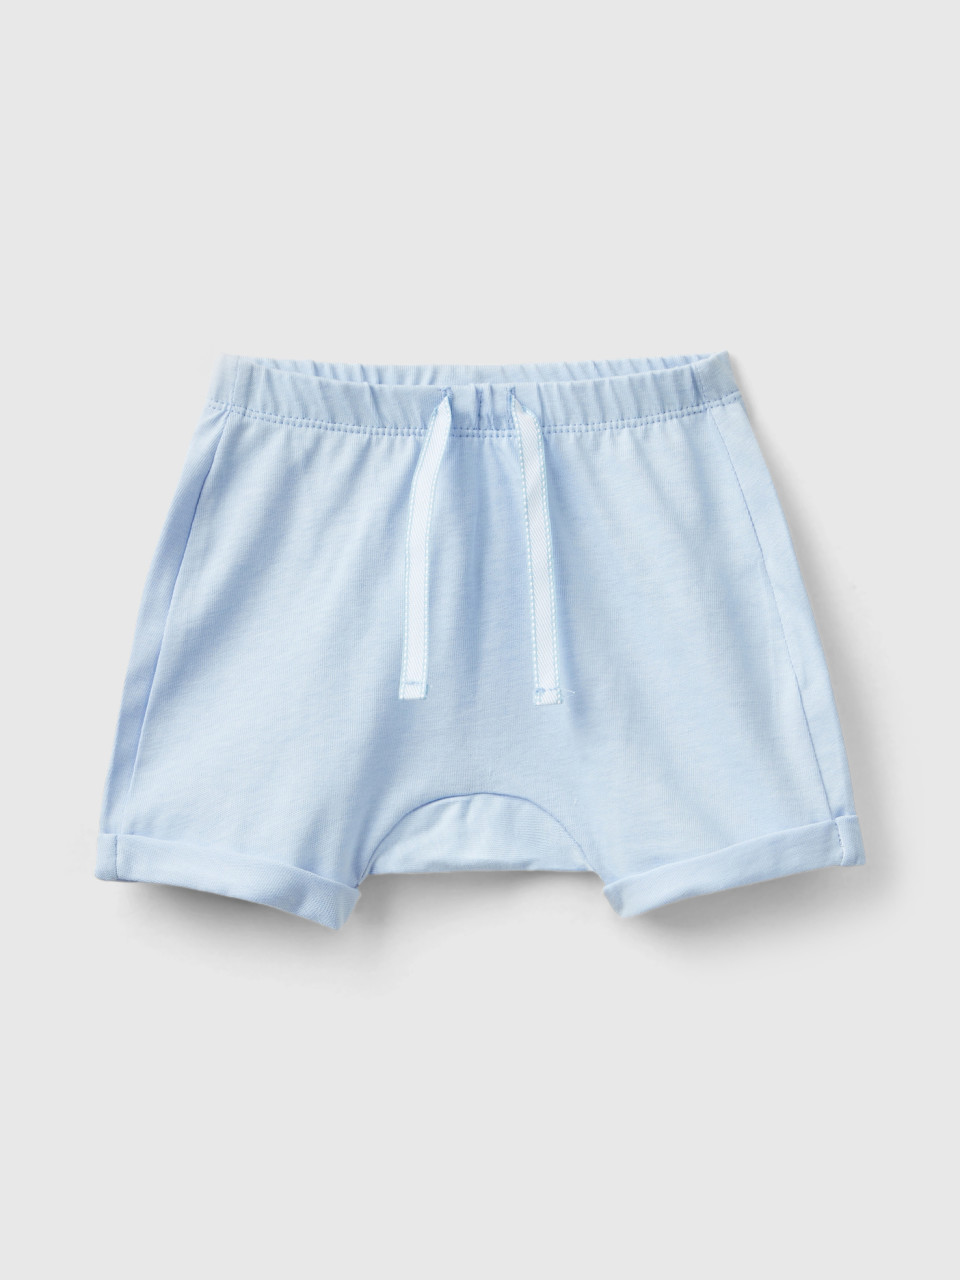 Benetton, Shorts With Patch On The Back, Sky Blue, Kids